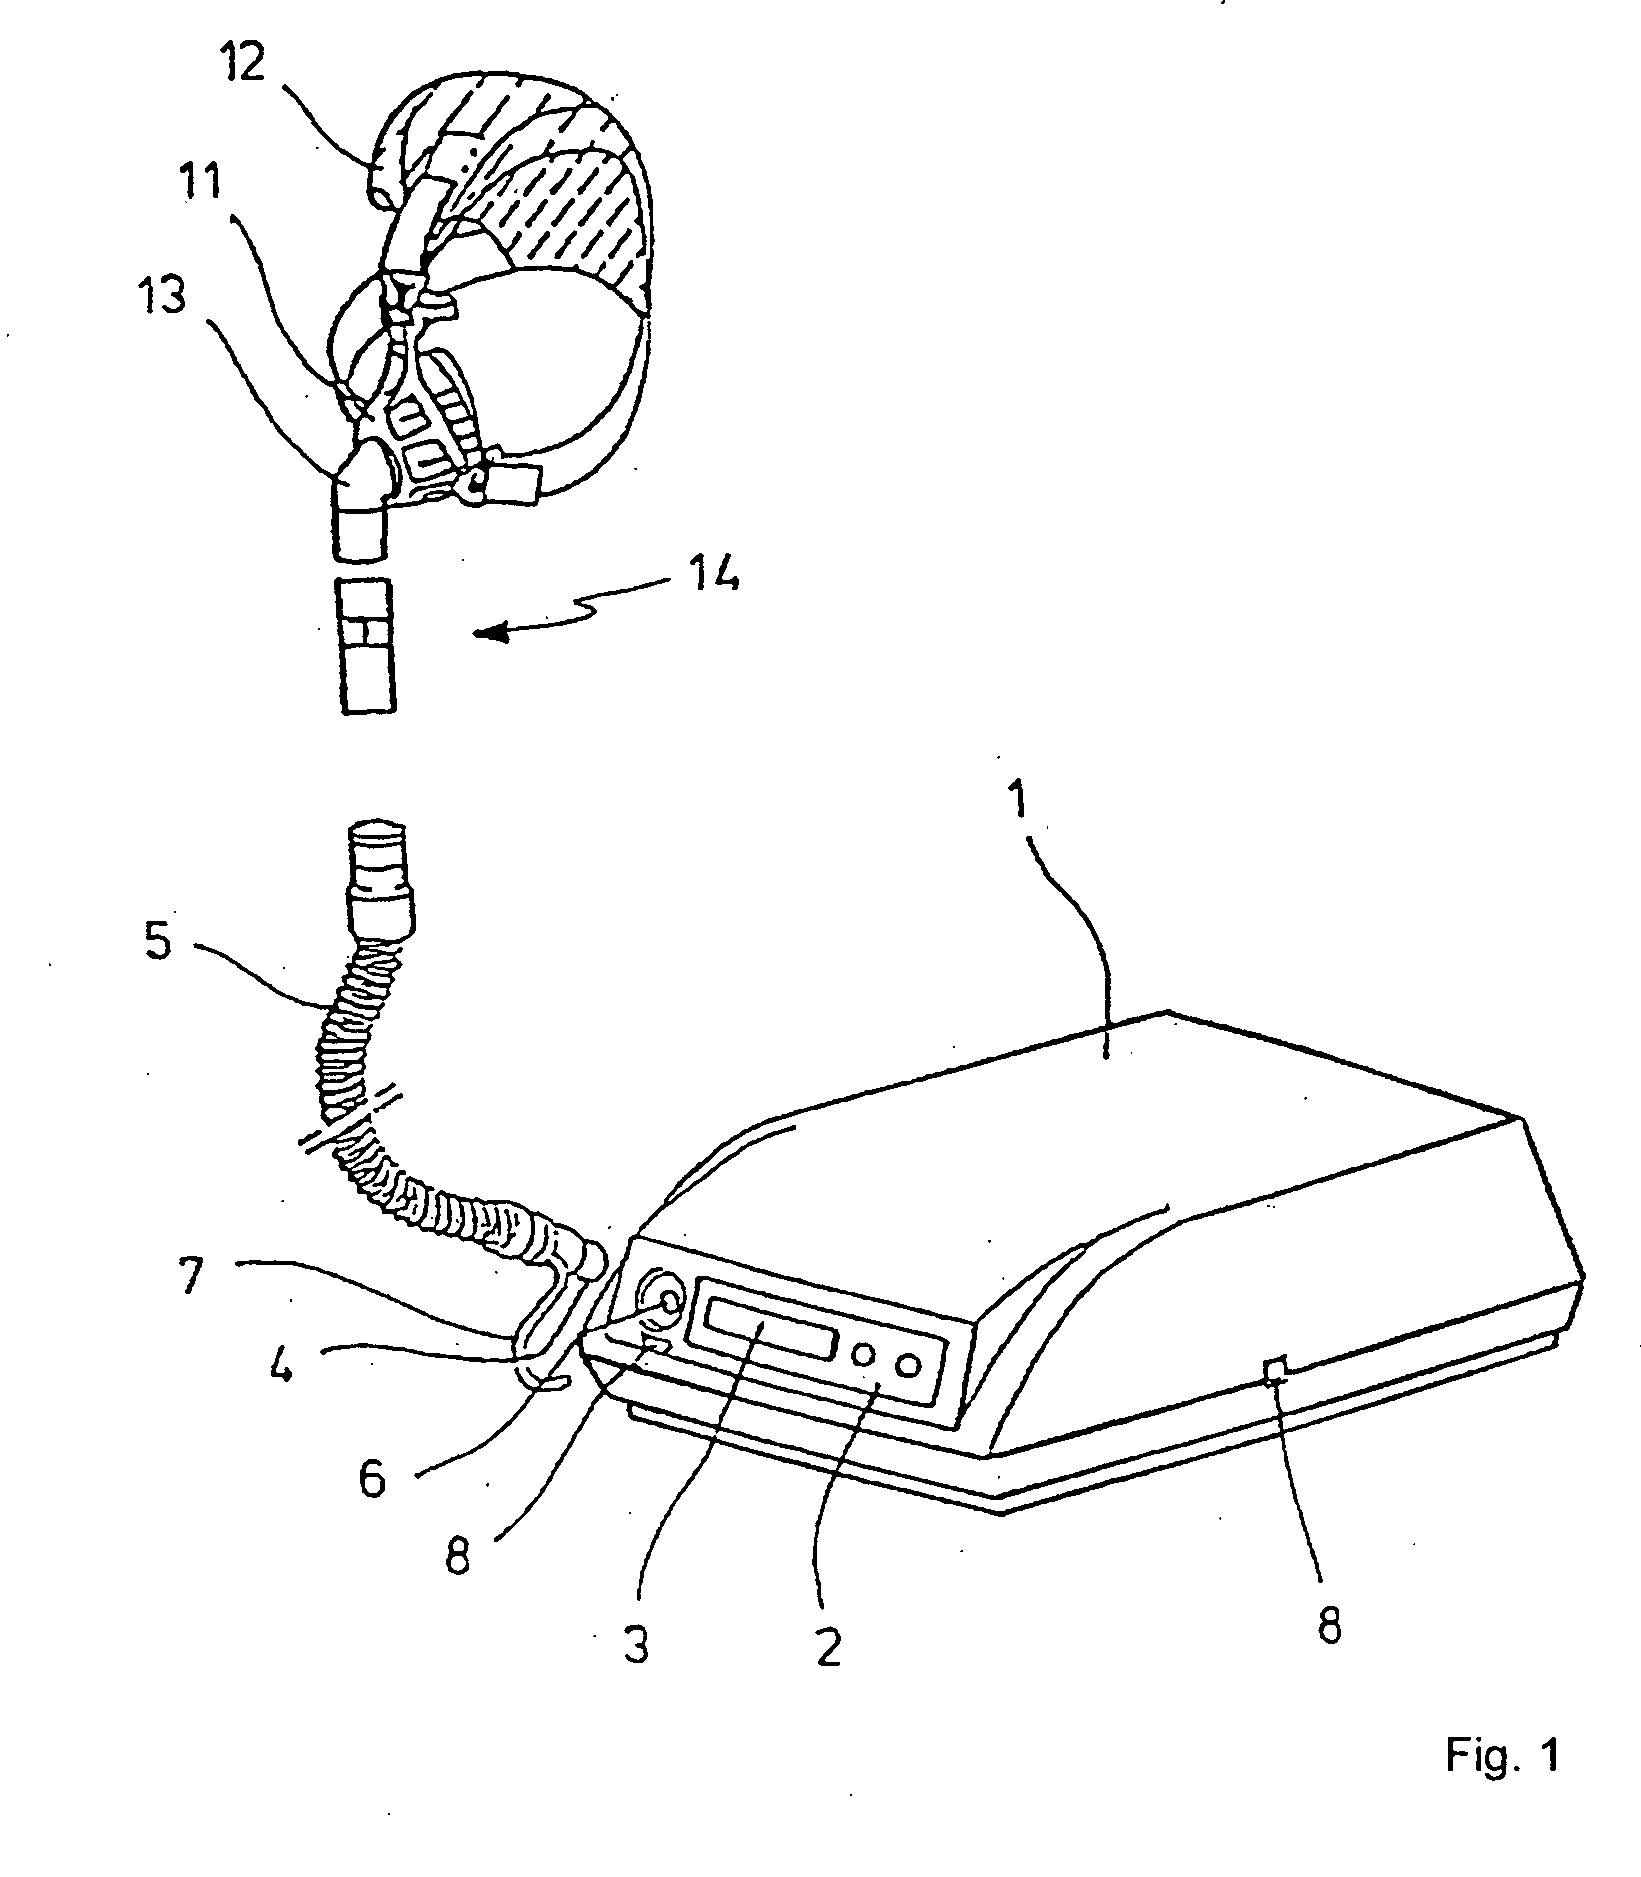 Ventilator with memory for operating data